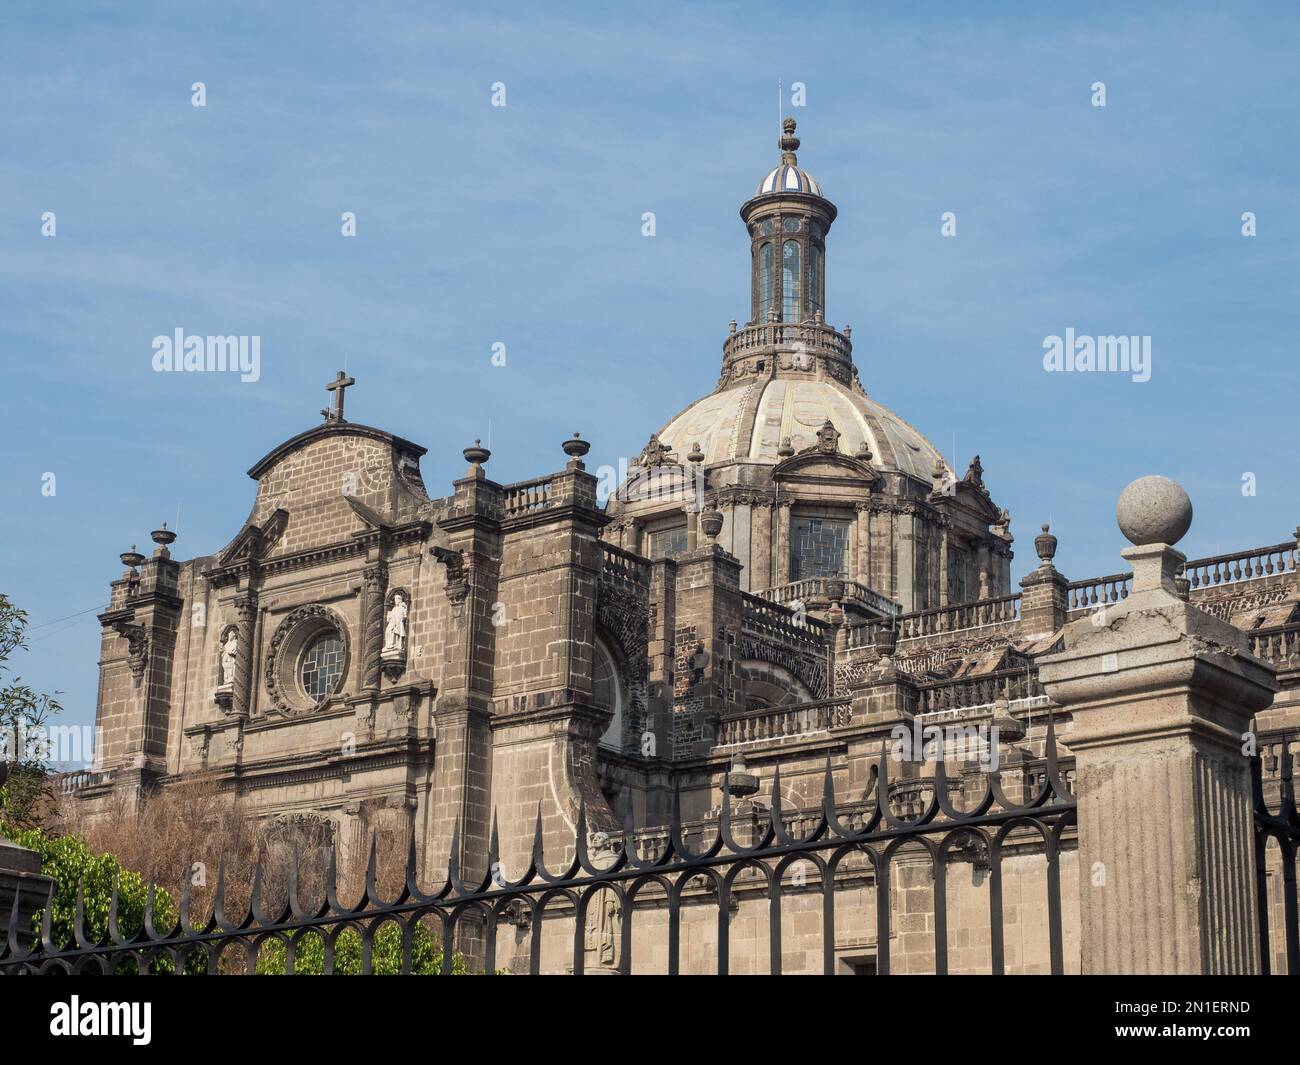 The Cathedral, built from 1573 to 1813, stands atop the religious center of the conquered city of the Aztecs (Mexica), Mexico City, Mexico Stock Photo